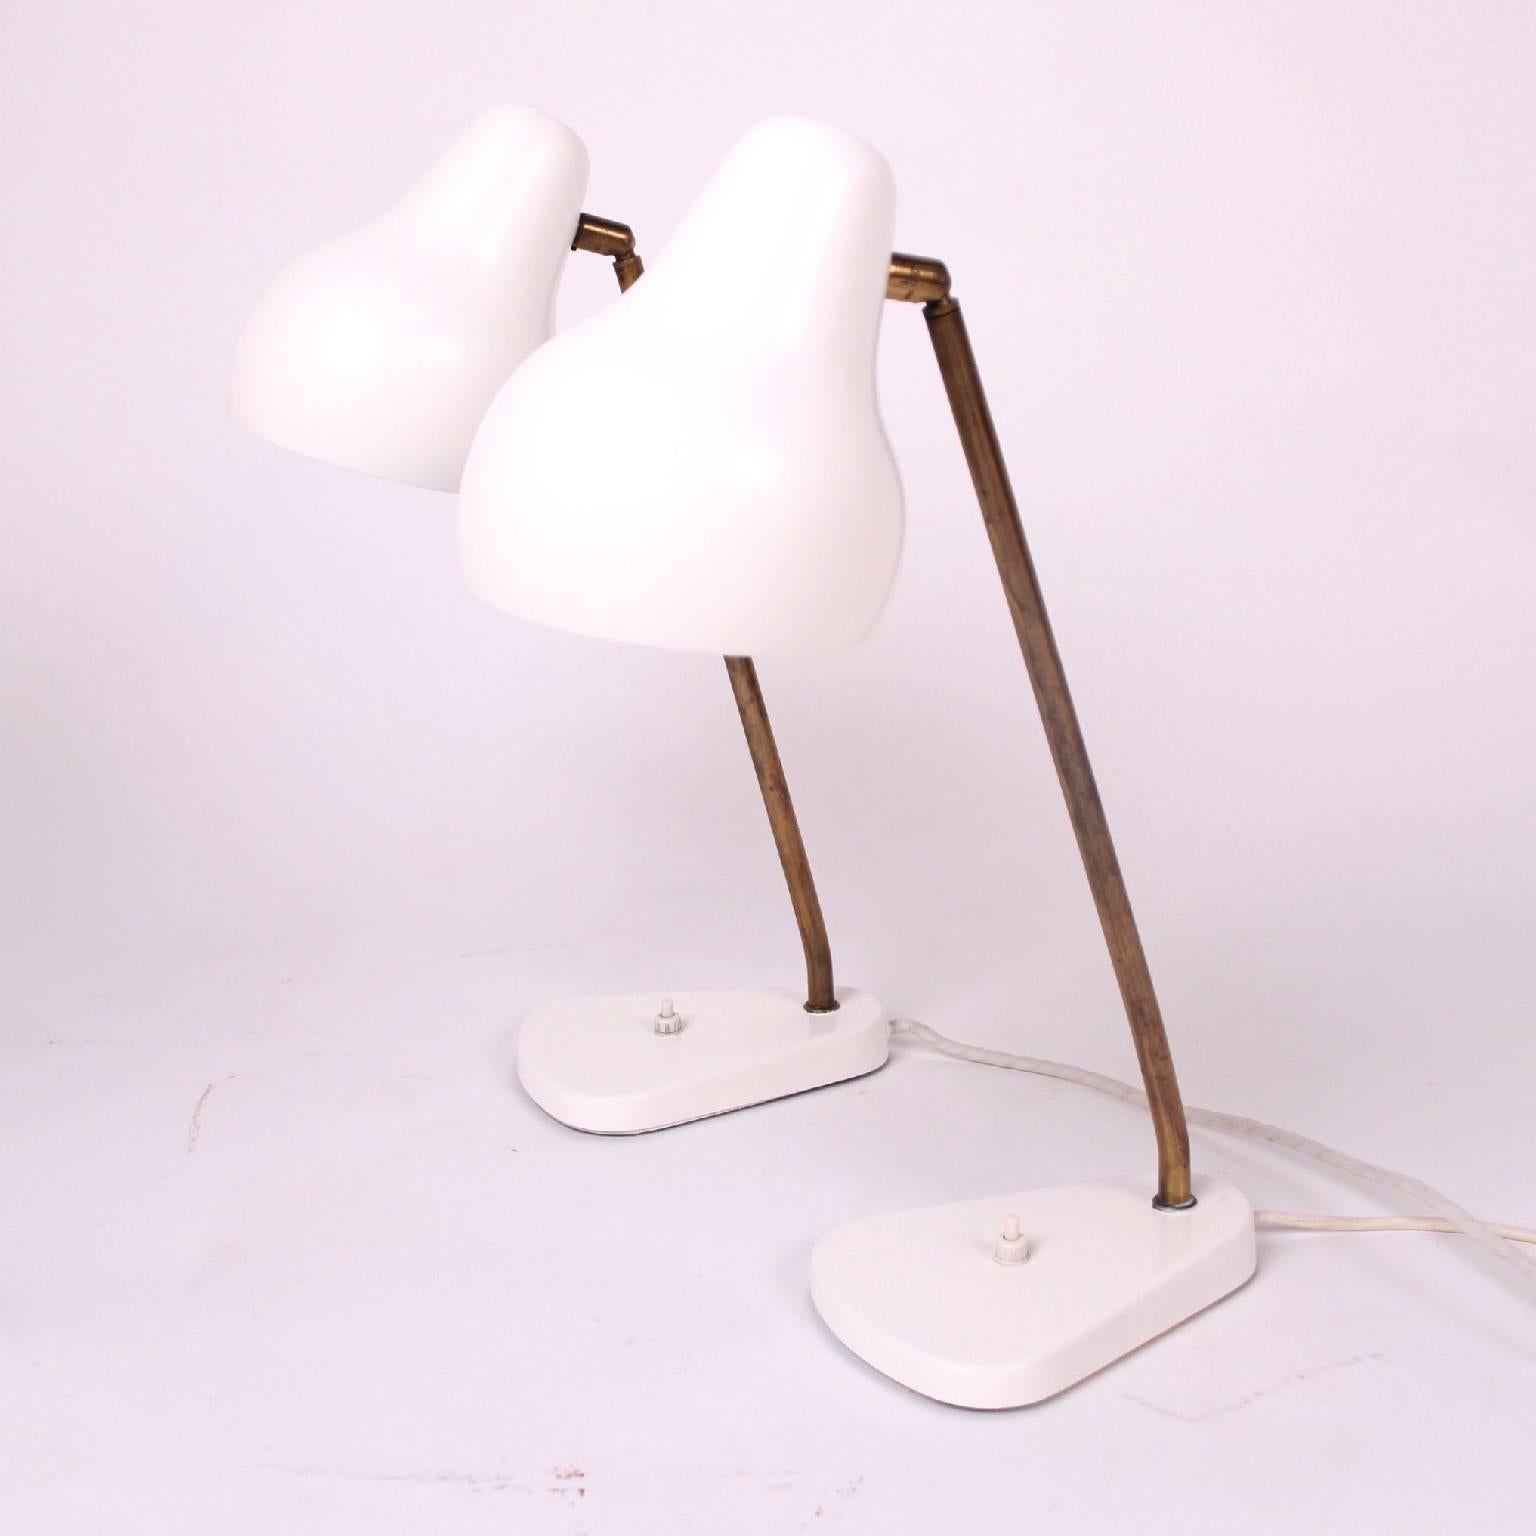 VILHELM LAURITZEN AND LOUIS POULSEN

SCANDINAVIAN MODERN

A pair of original table lamps designed by Vilhelm Lauritzen specifically for the Radiohuset building in Copenhagen in 1942. 

The fixture emits downward directed light. The angle of the